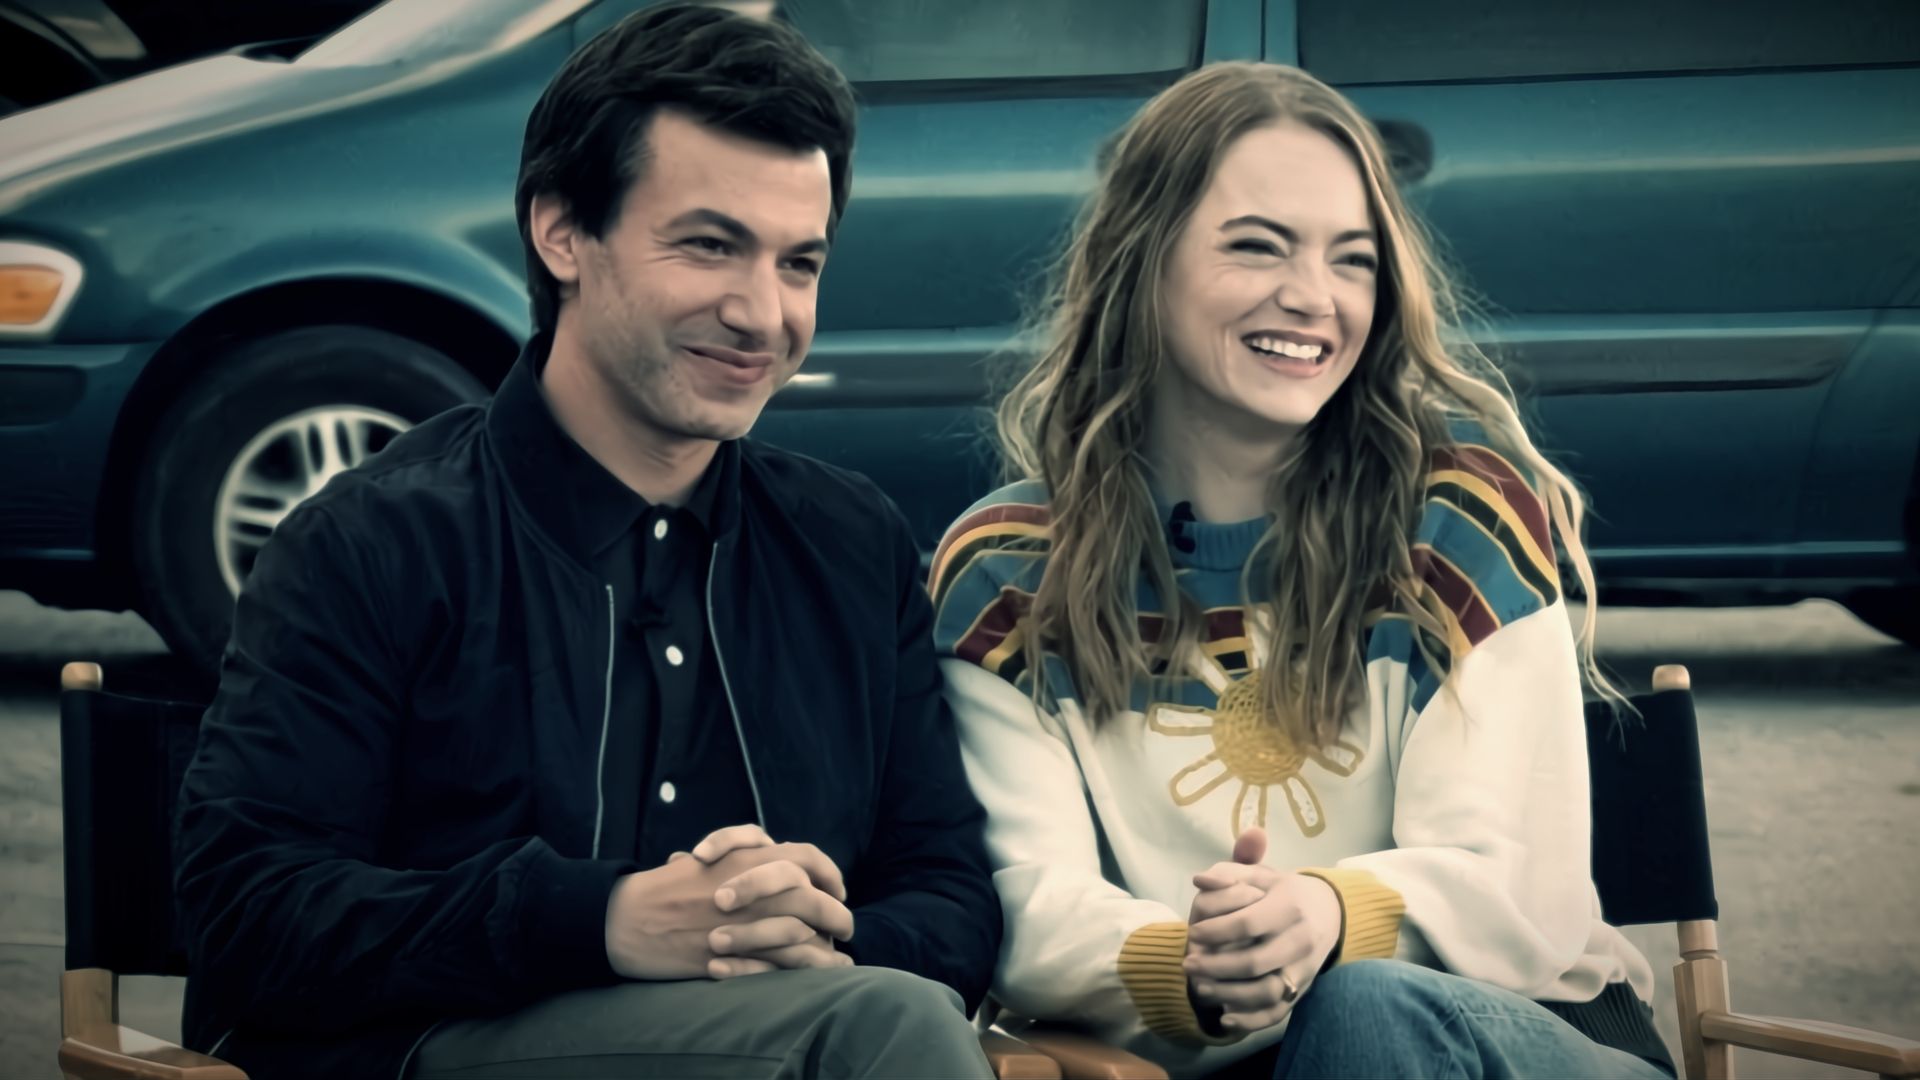 Nathan Fielder as Asher and Emma Stone as Whitney smile together at a camera in A24's The Curse